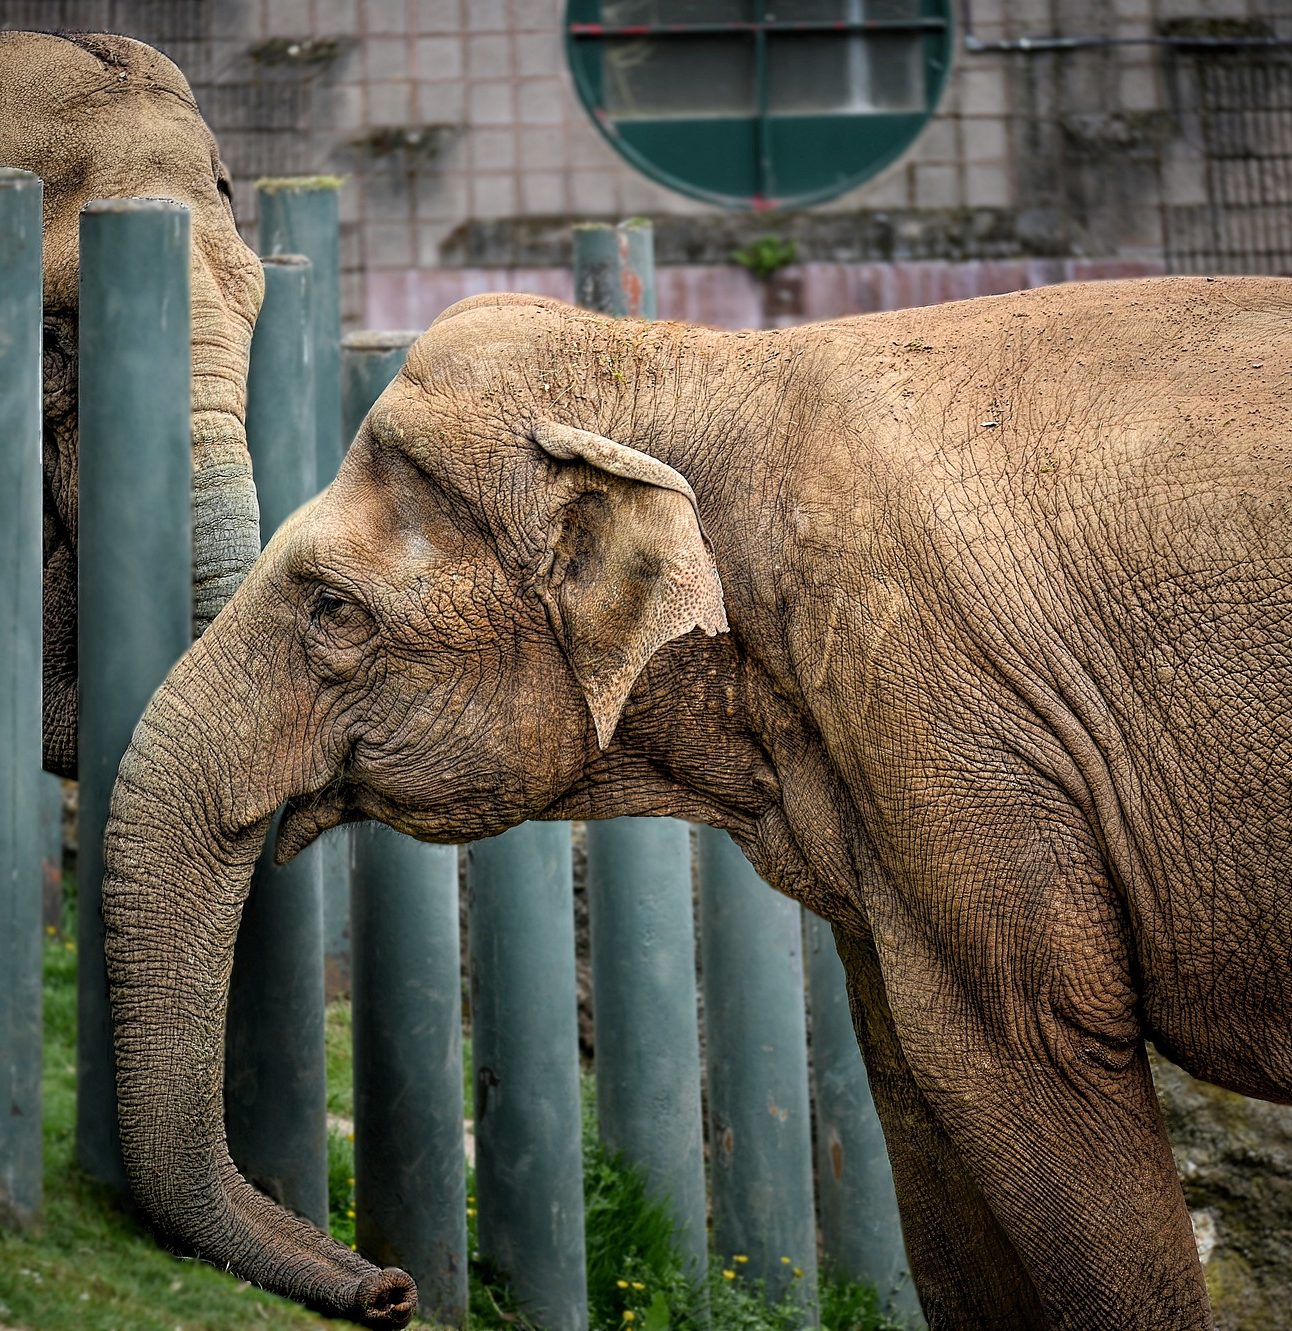 An Asian elephant in front of a fence in a zoo